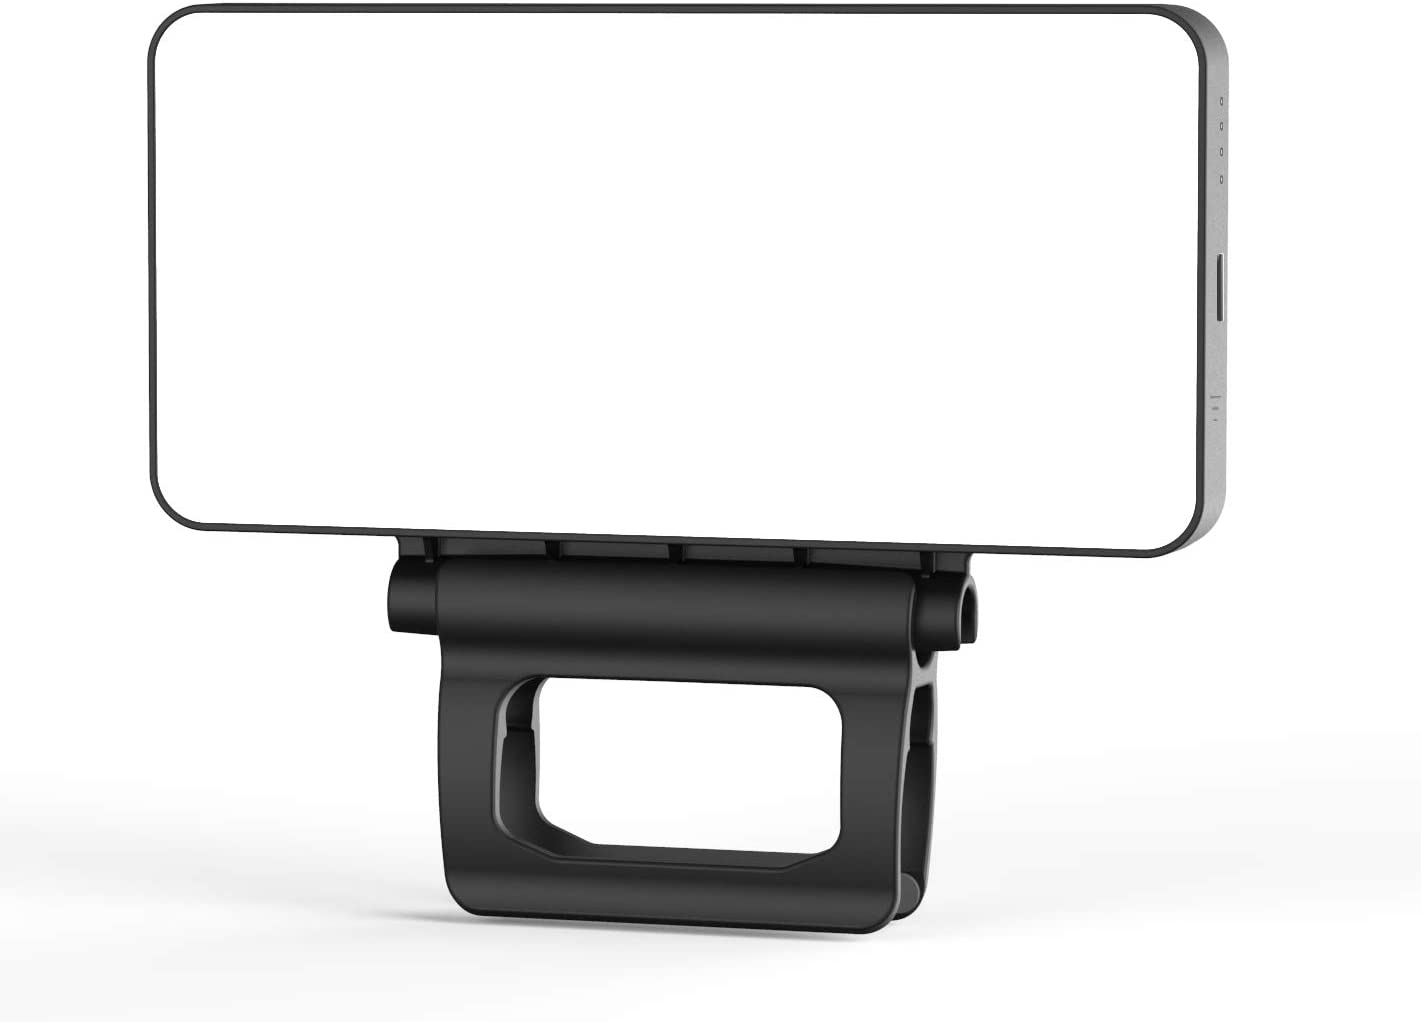 BIGSOFTI soft light for video conferencing